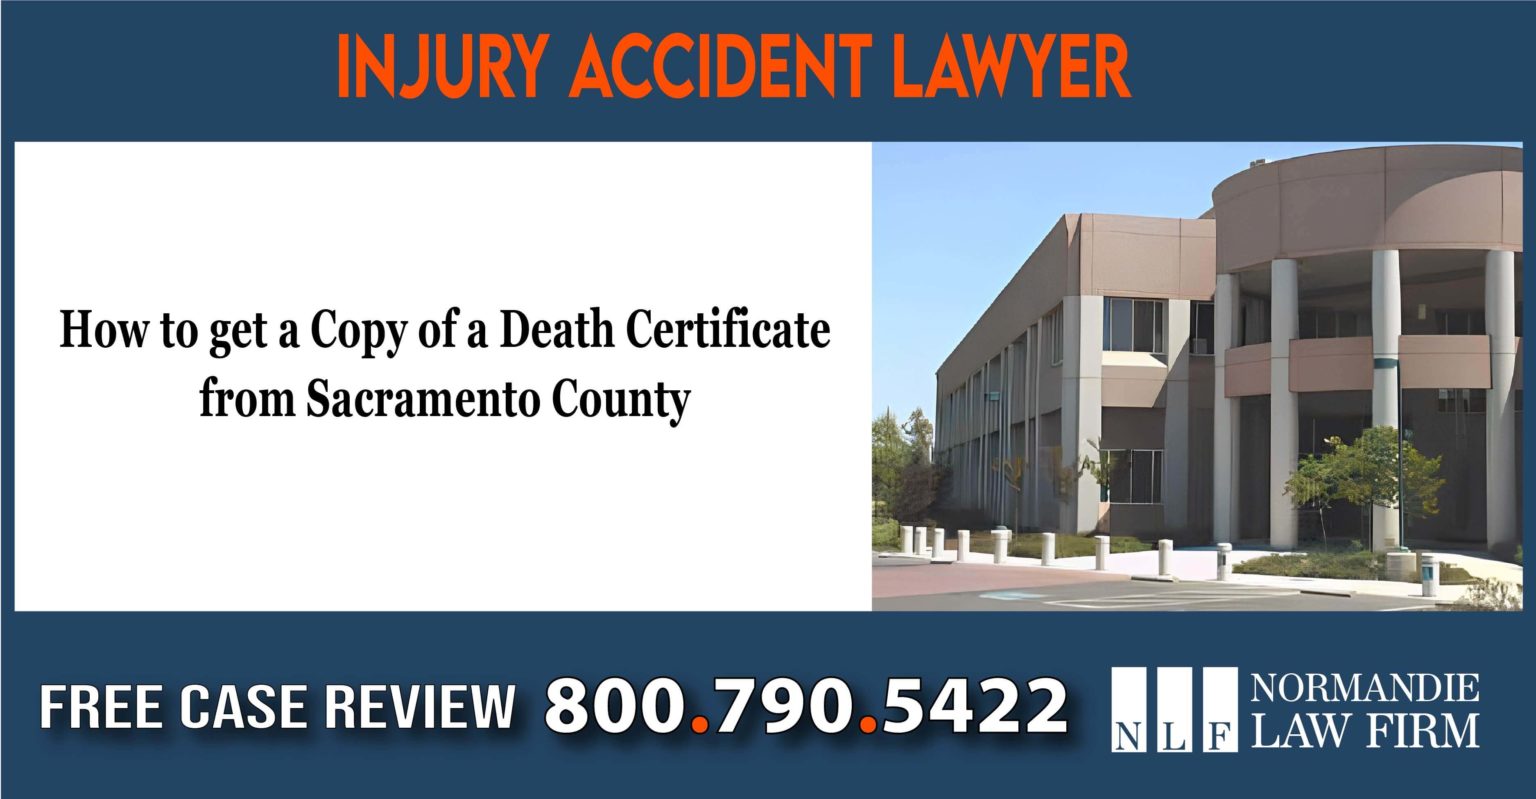 How to get a Copy of a Death Certificate from Sacramento County